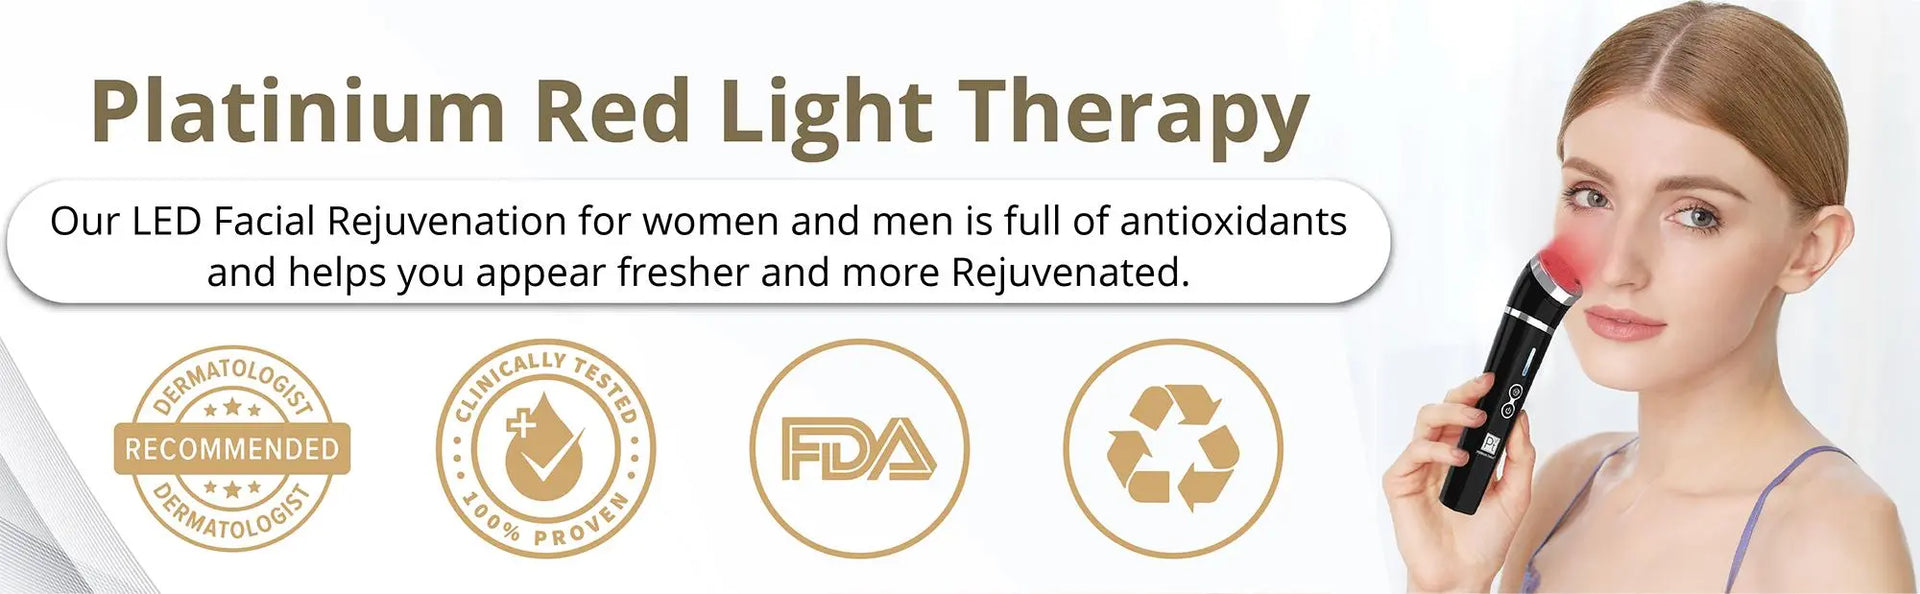 The-Benefits-of-LED-Light-Therapy-Platinum-Red-Light-Therapy Platinum Delux ®